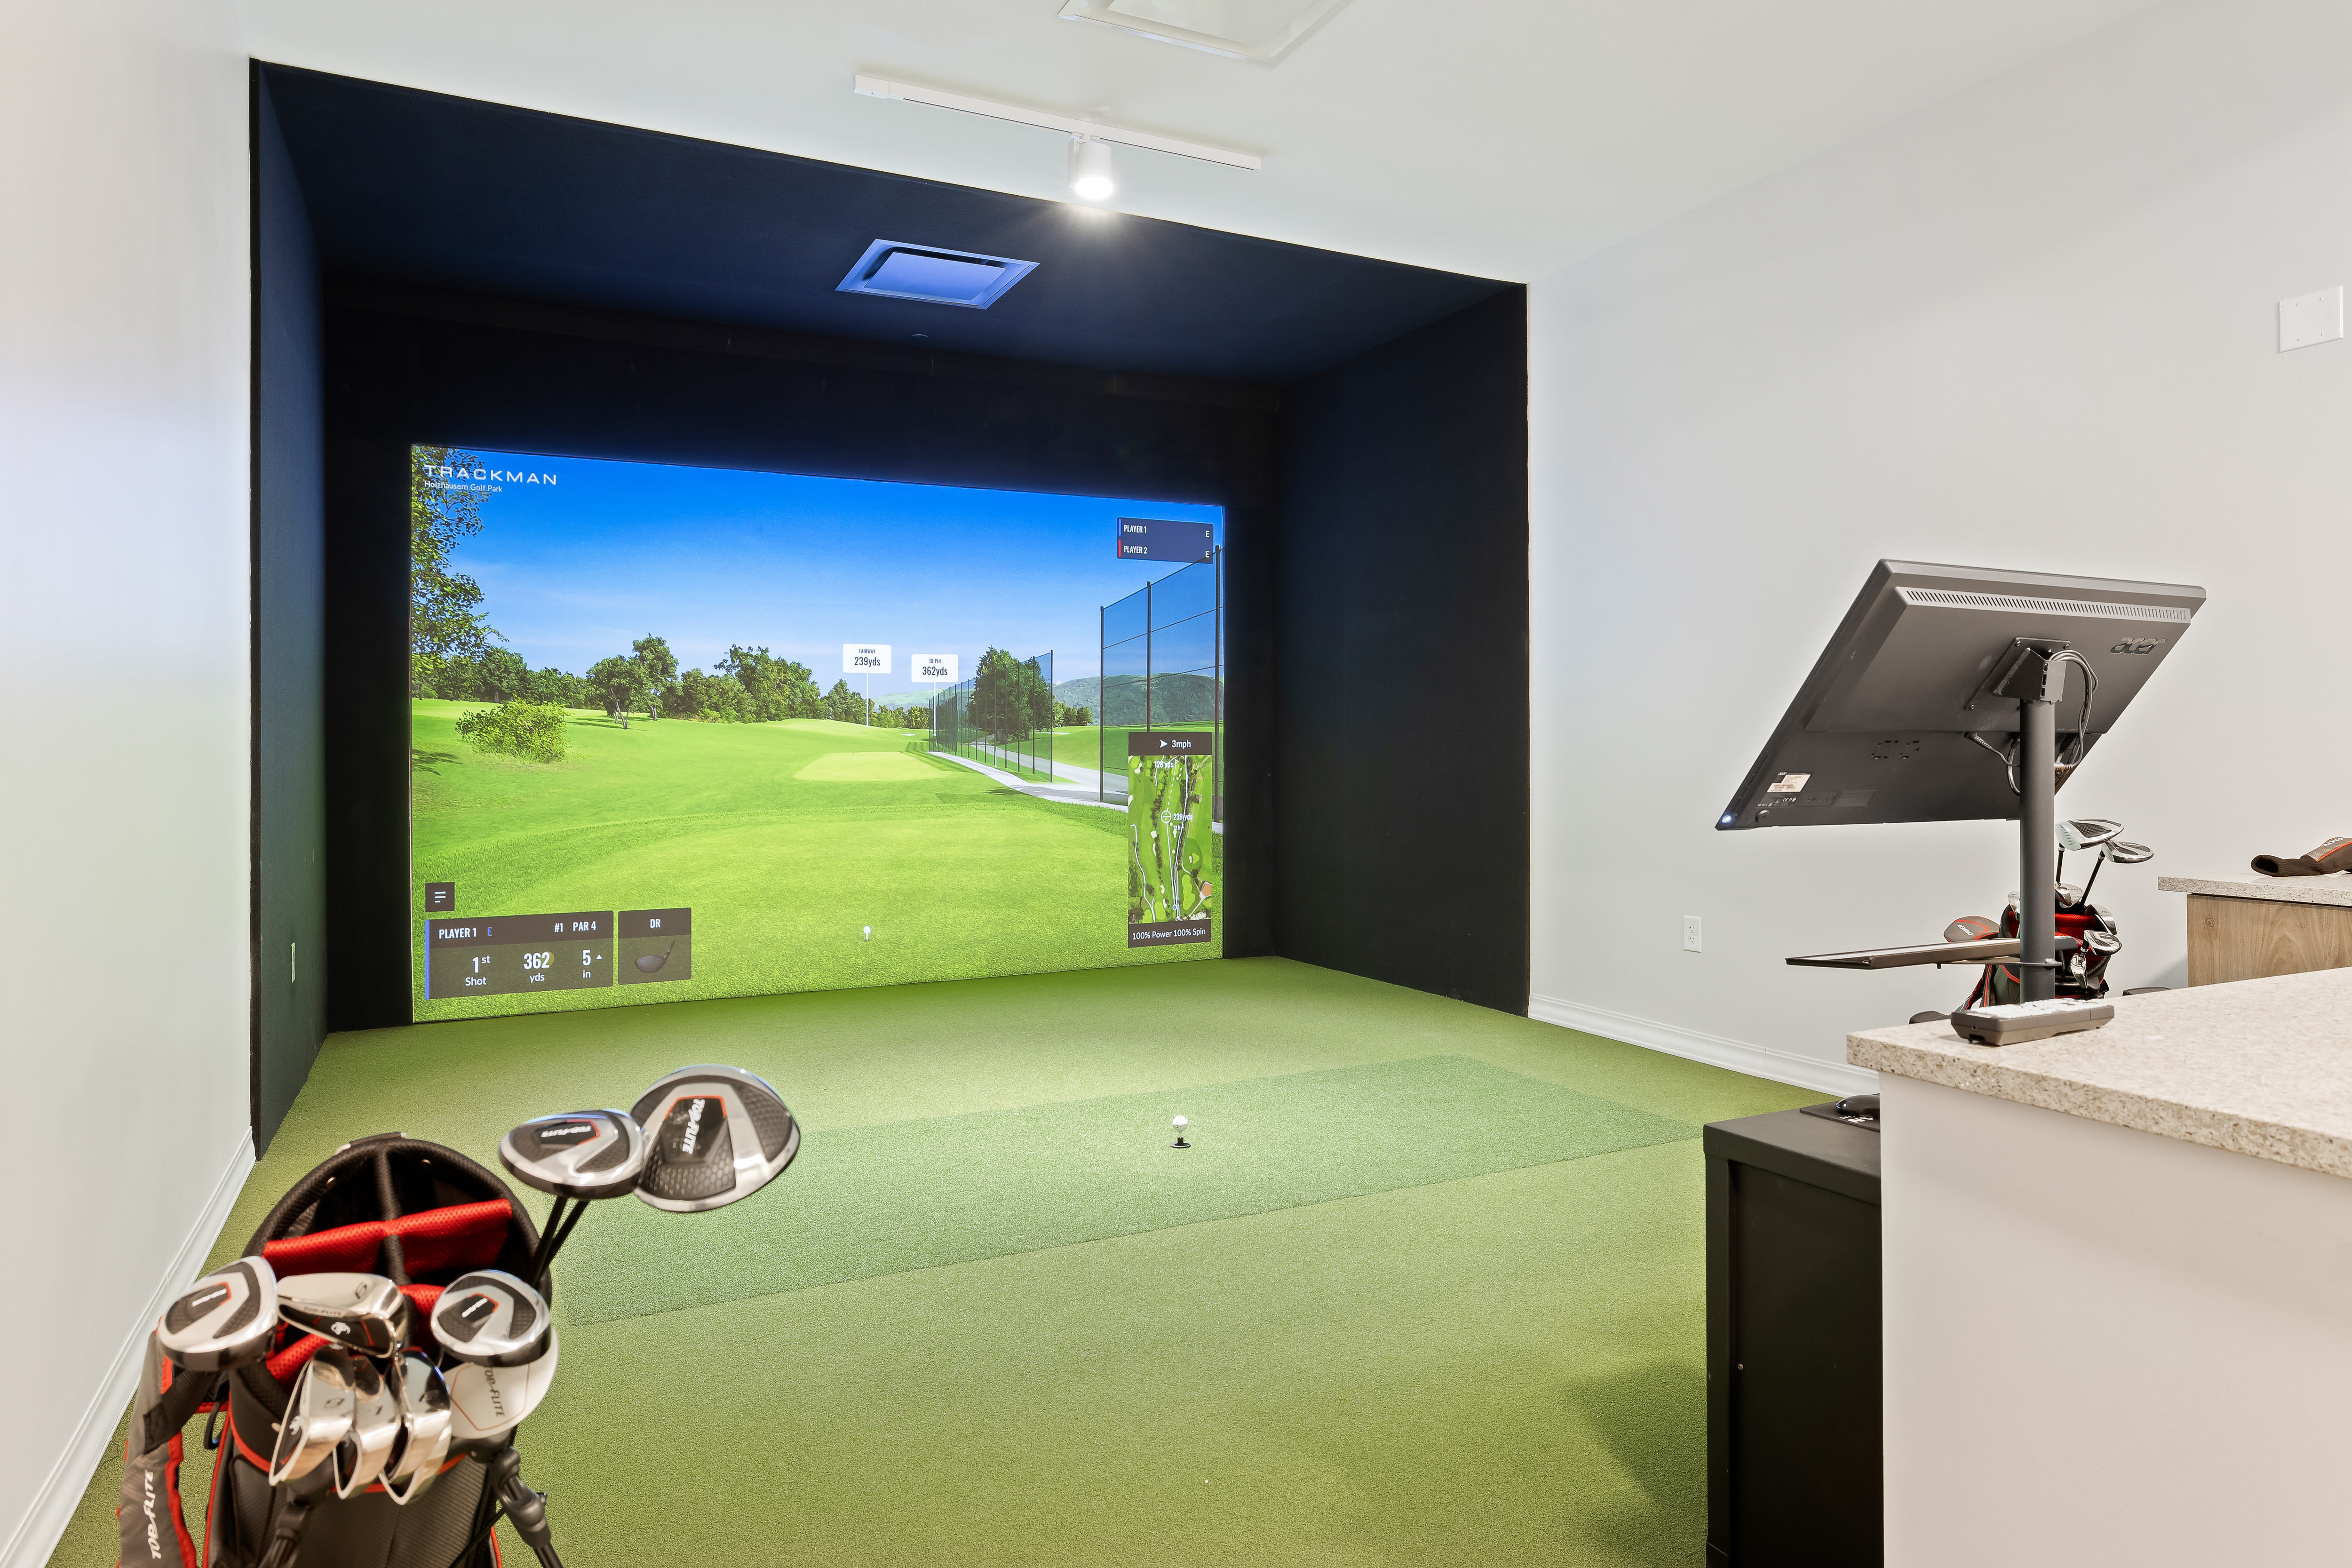 Golf Simulator Anthology of Mayfield Heights in Mayfield Heights, Ohio